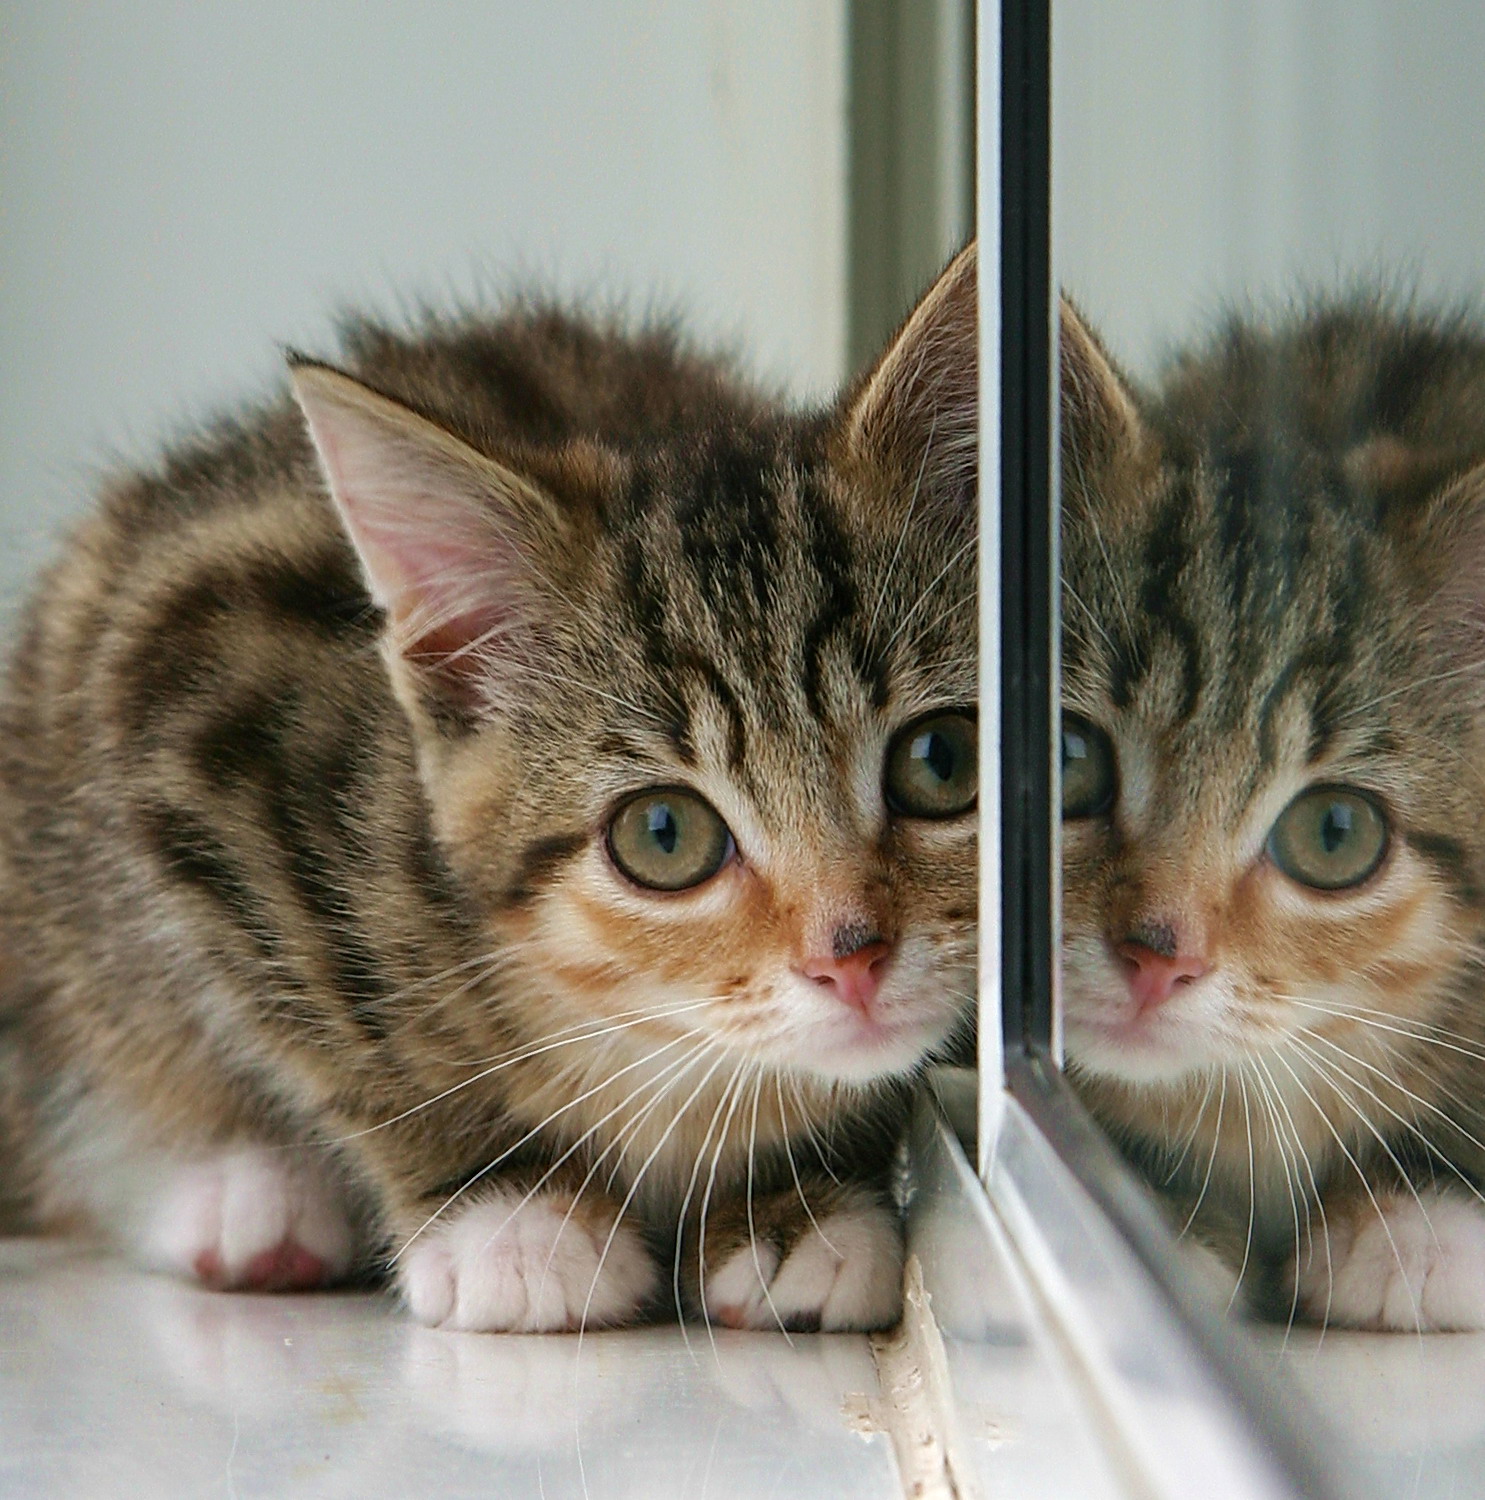 Kitten_and_partial_reflection_in_mirror